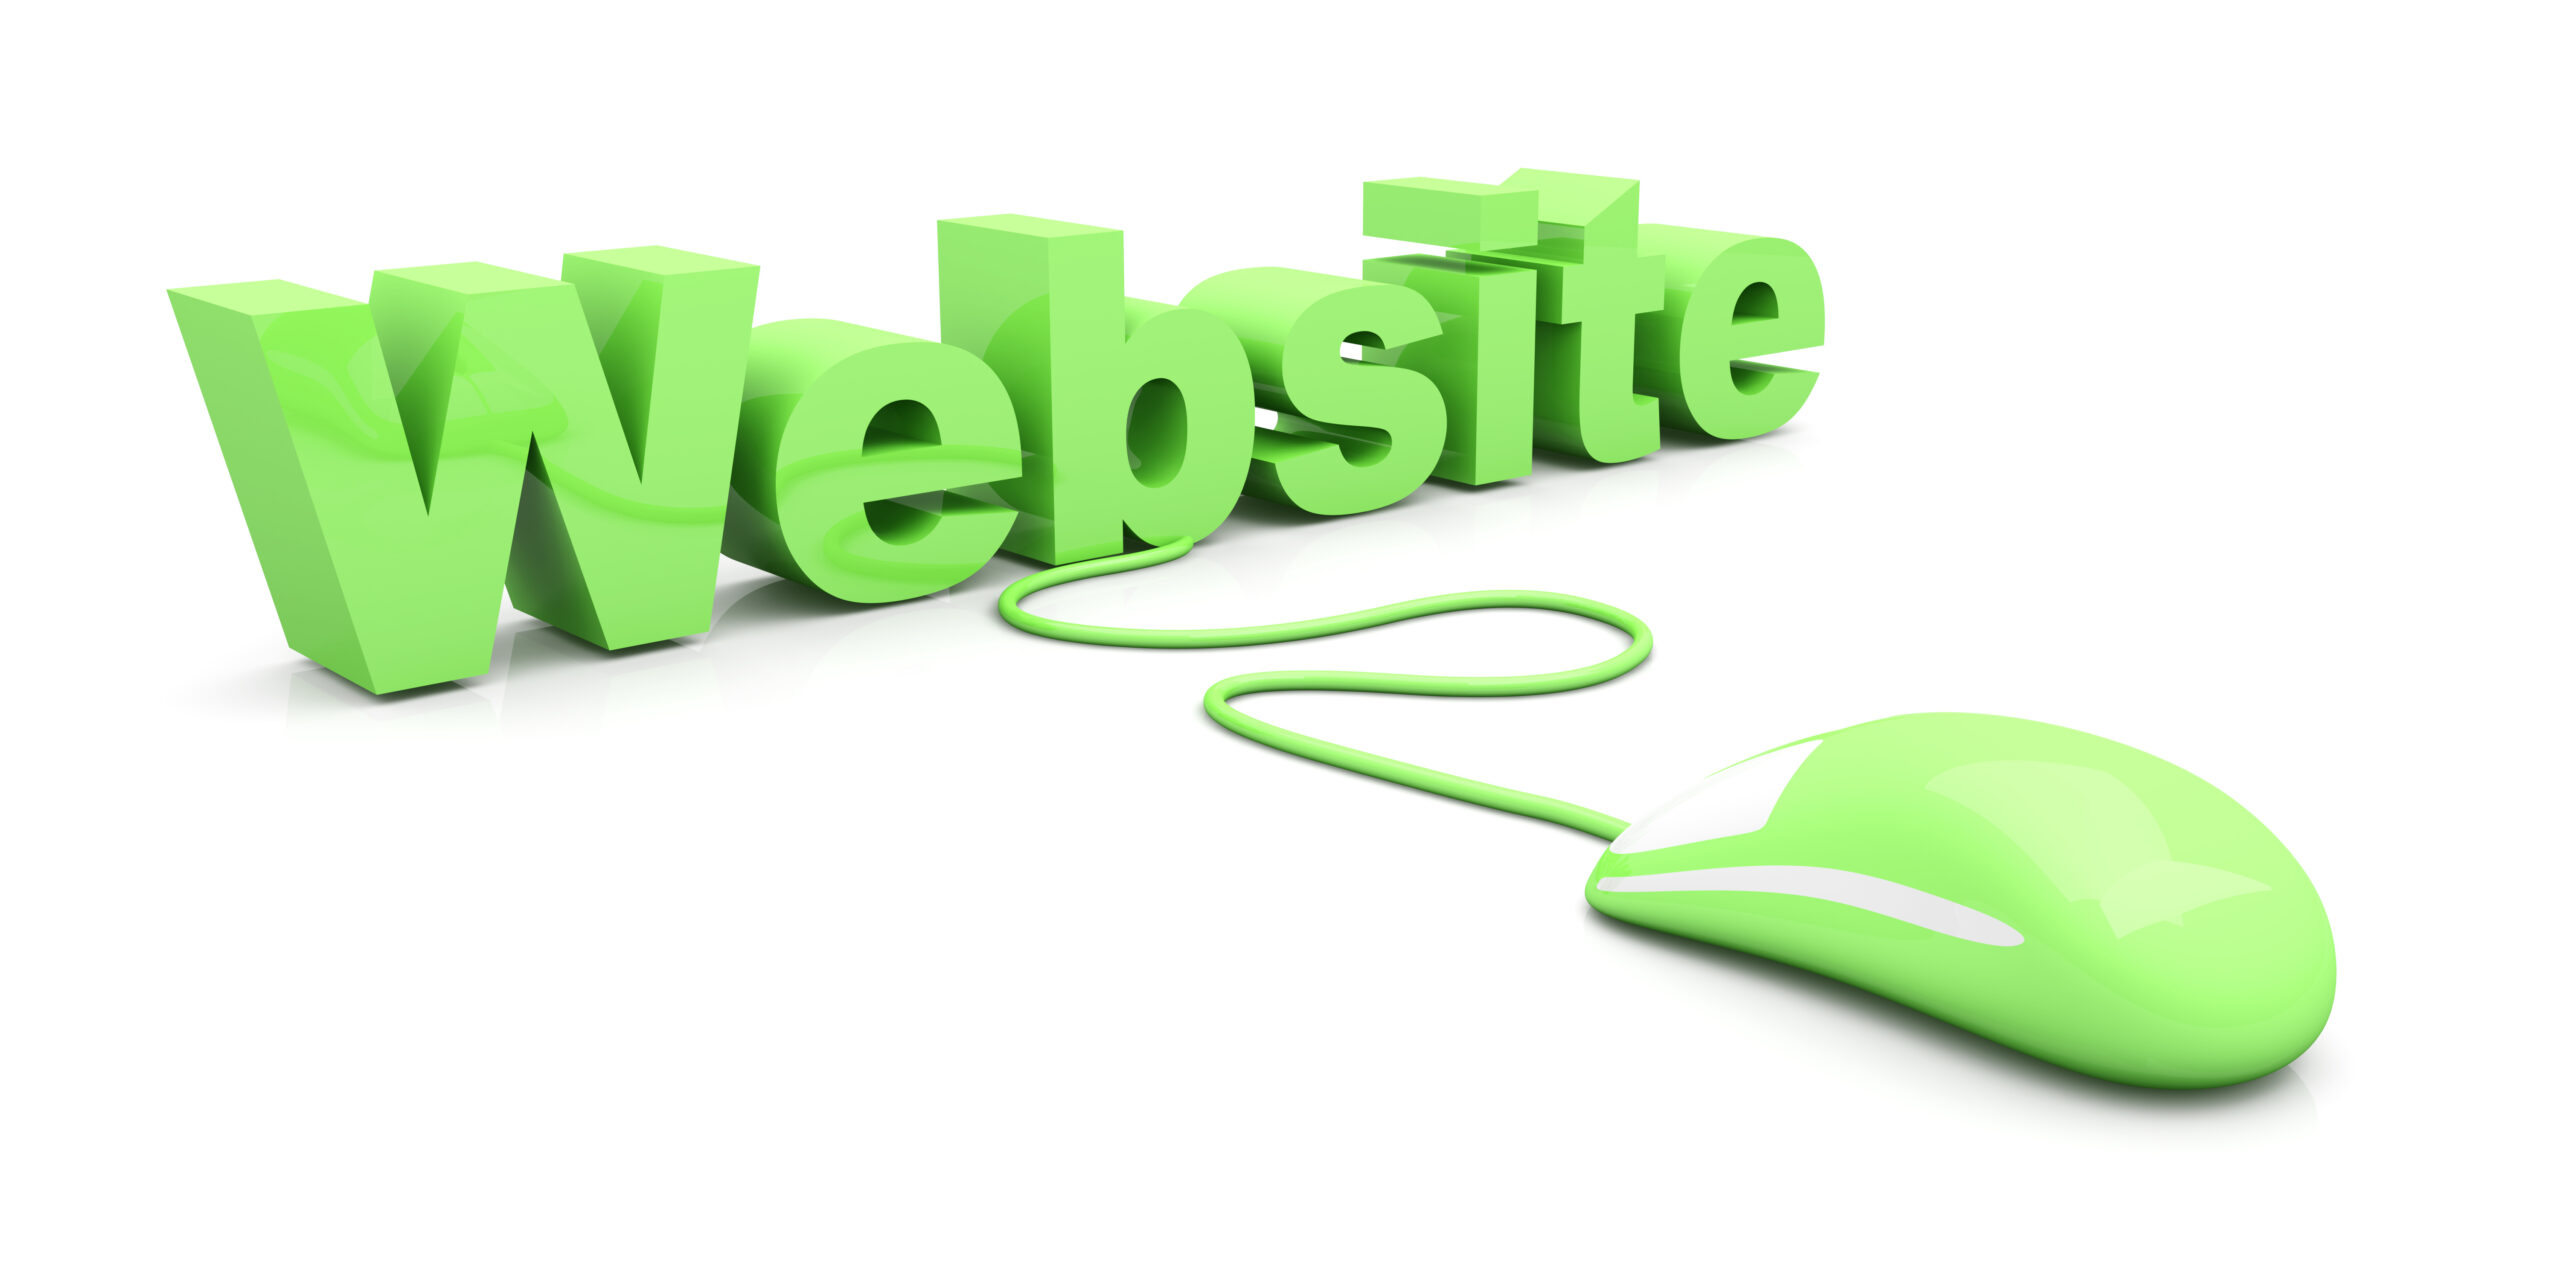 Having a website helps small businesses grow faster than social media